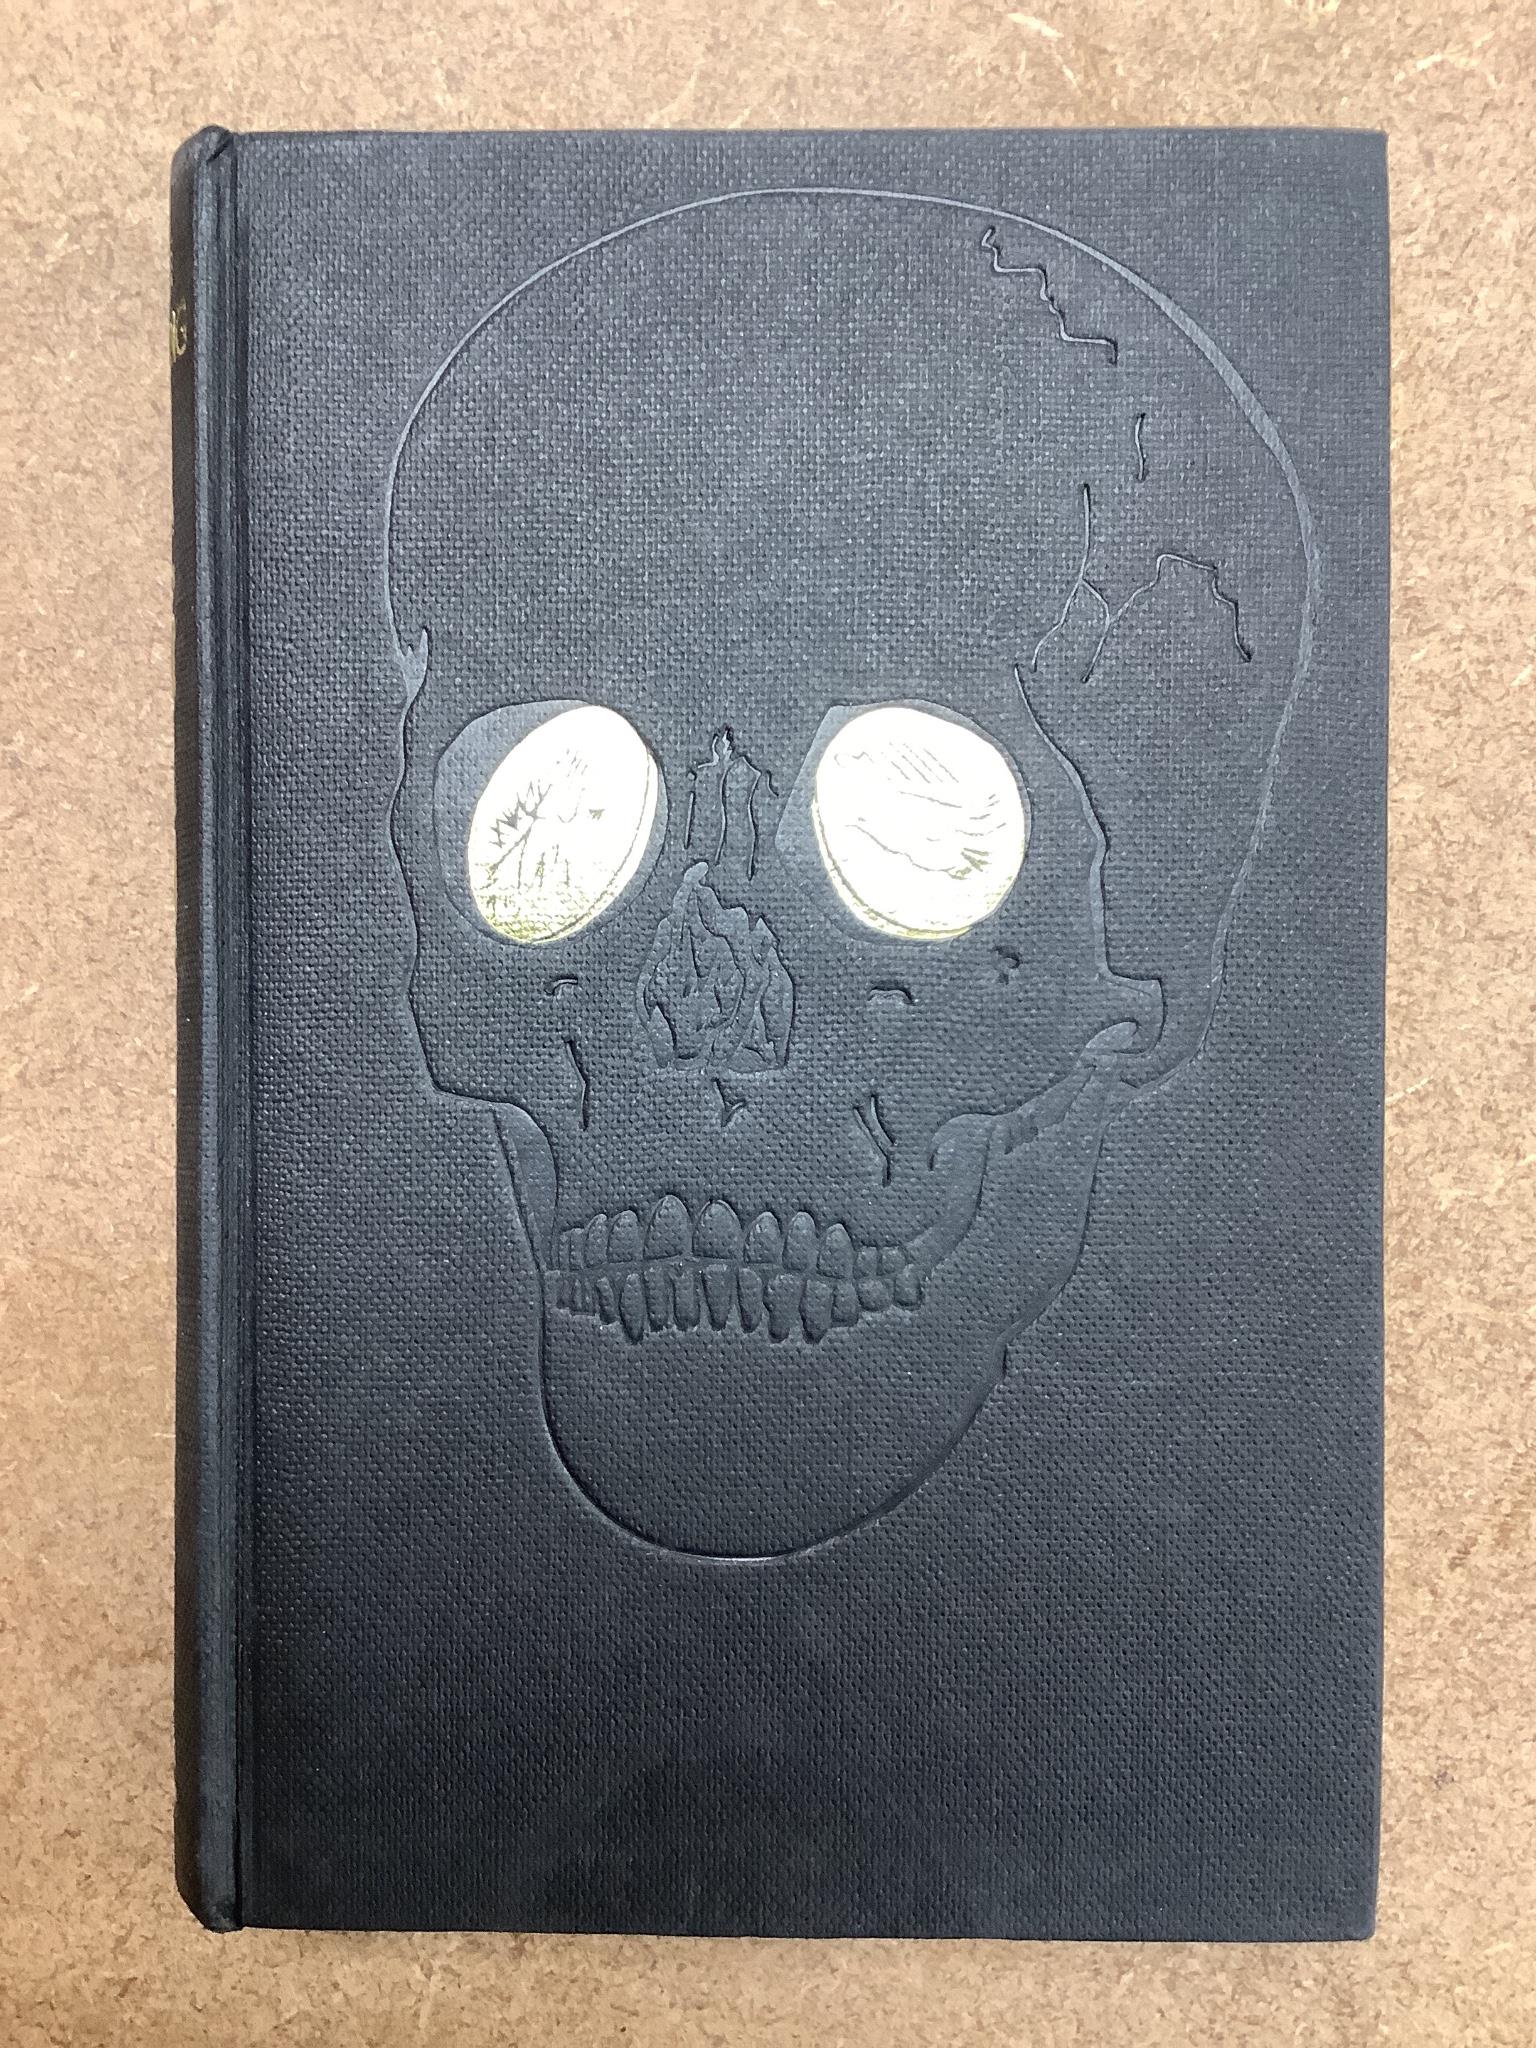 Fleming, Ian - Goldfinger, 1st edition, original black cloth with gilt lettering and embossed skull with unclipped d/j, designed by Richard Chopping, London, 1959